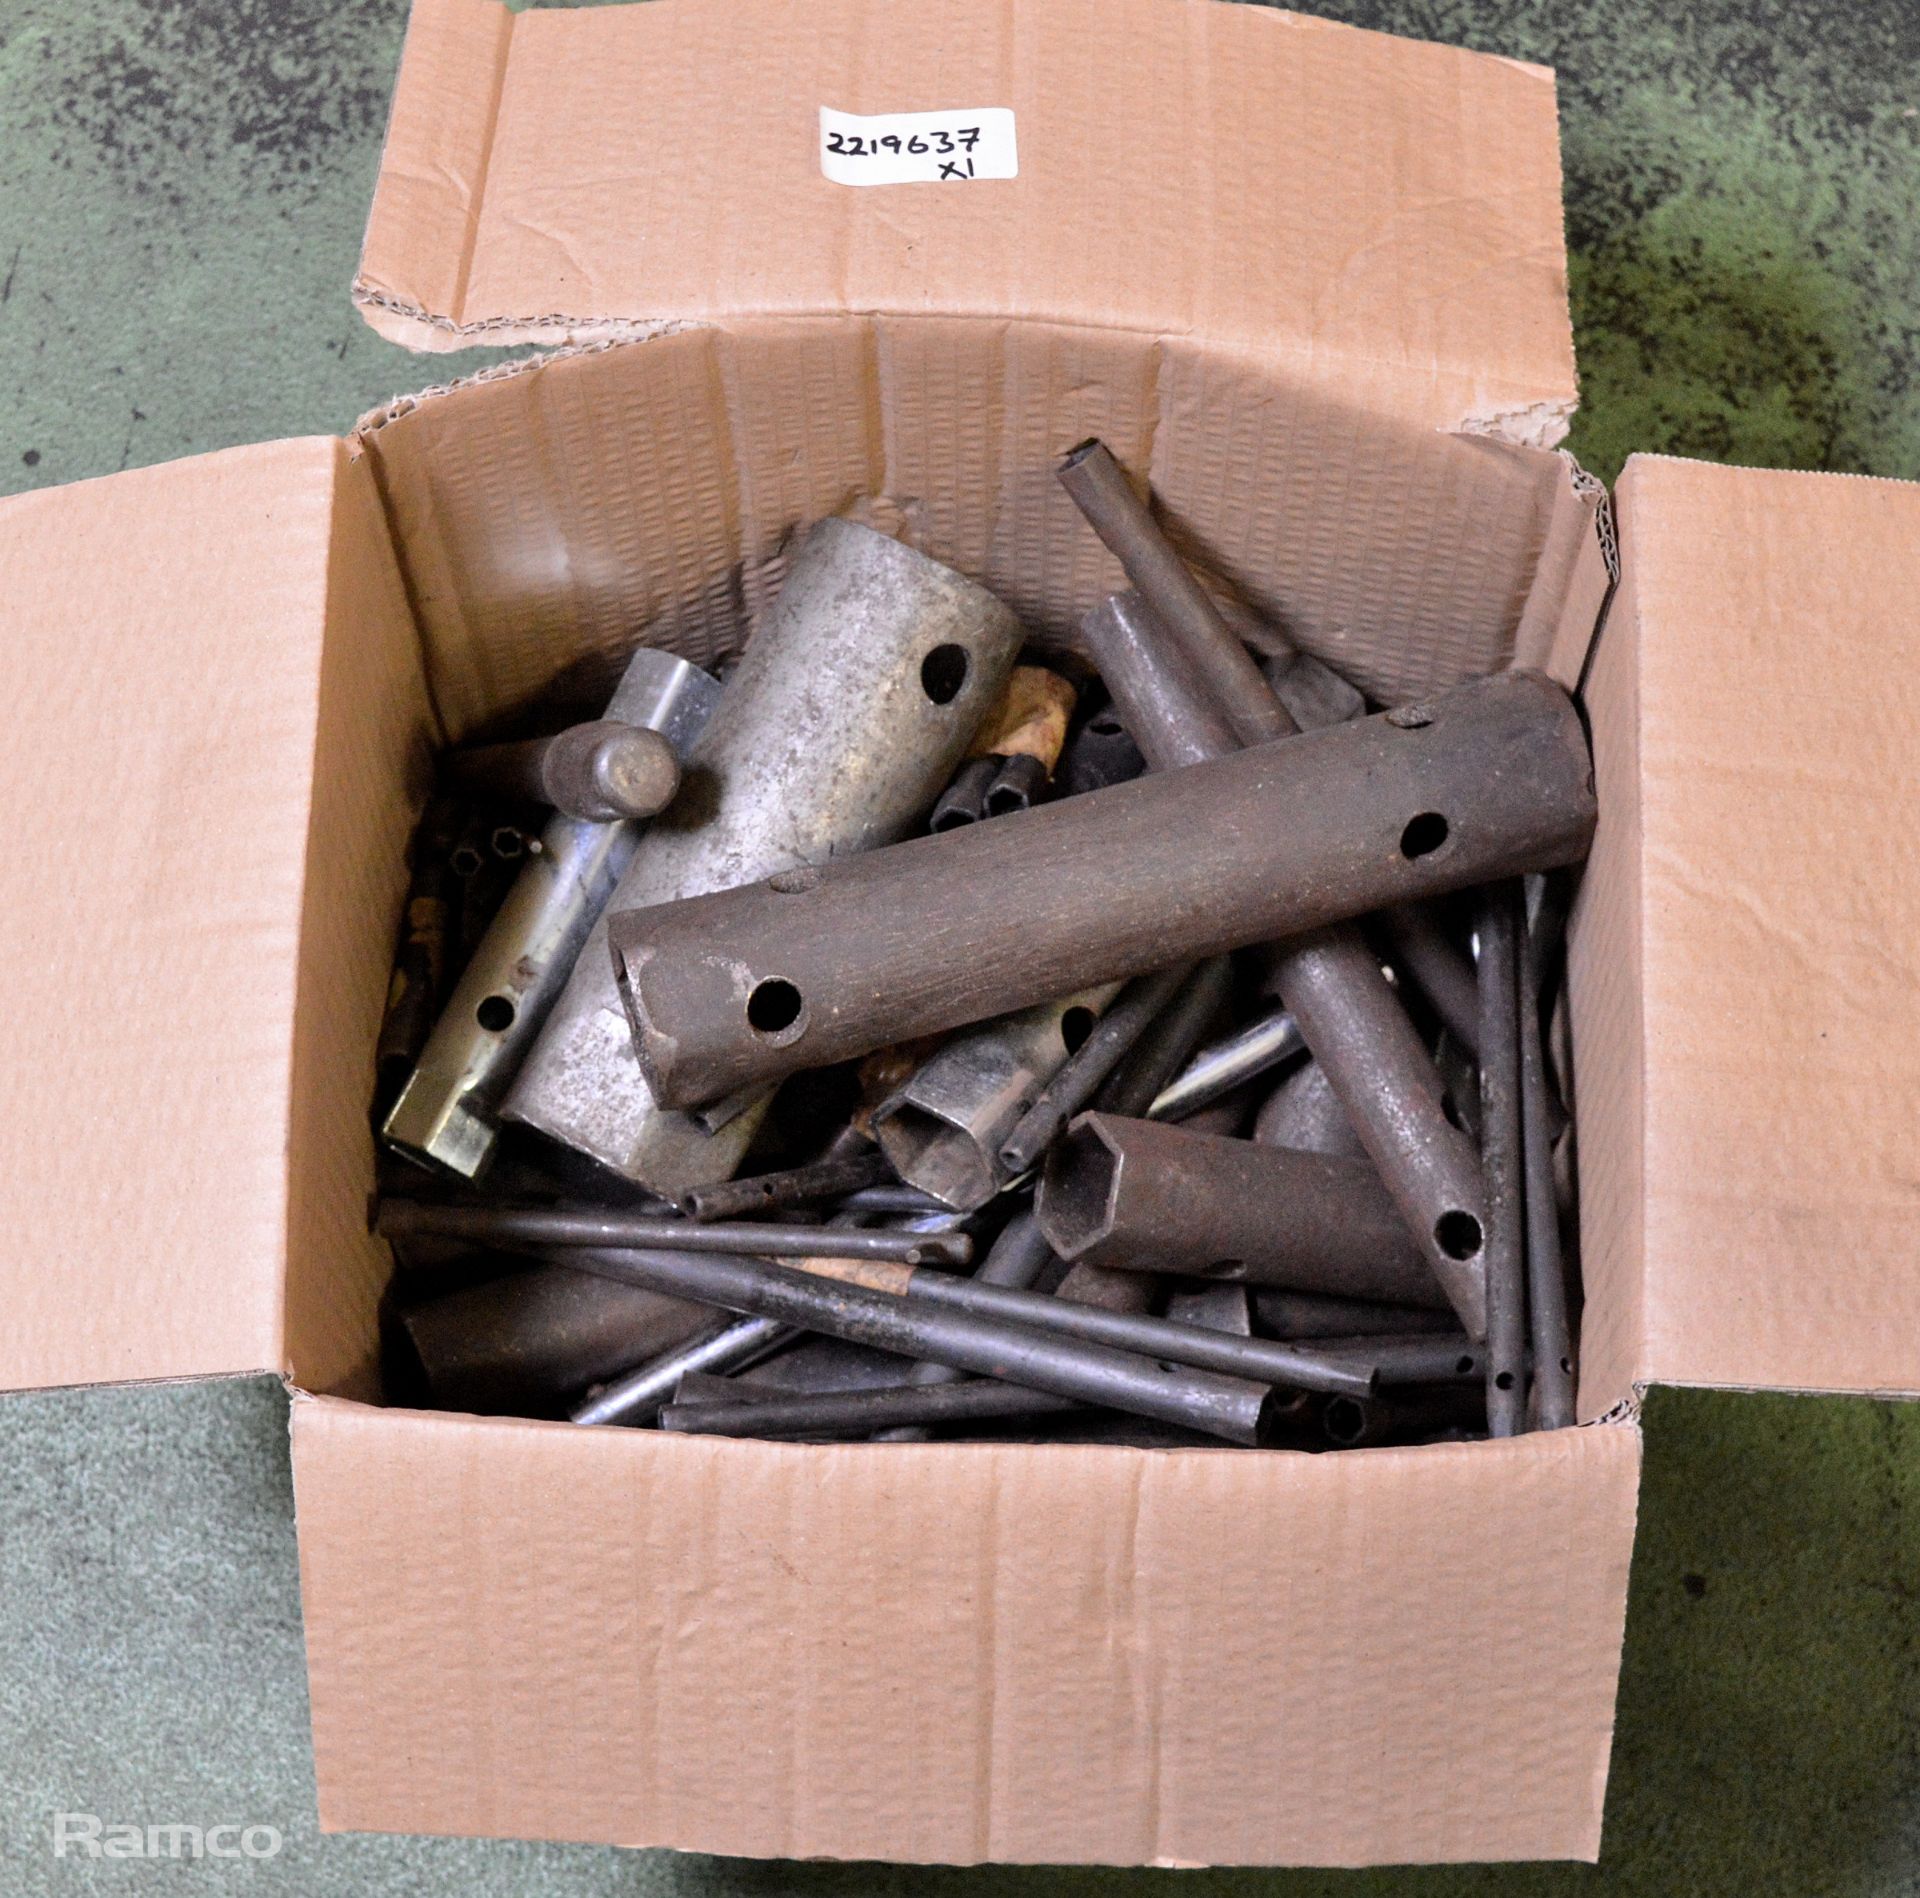 Hand Tools - Box Spanners - various sizes